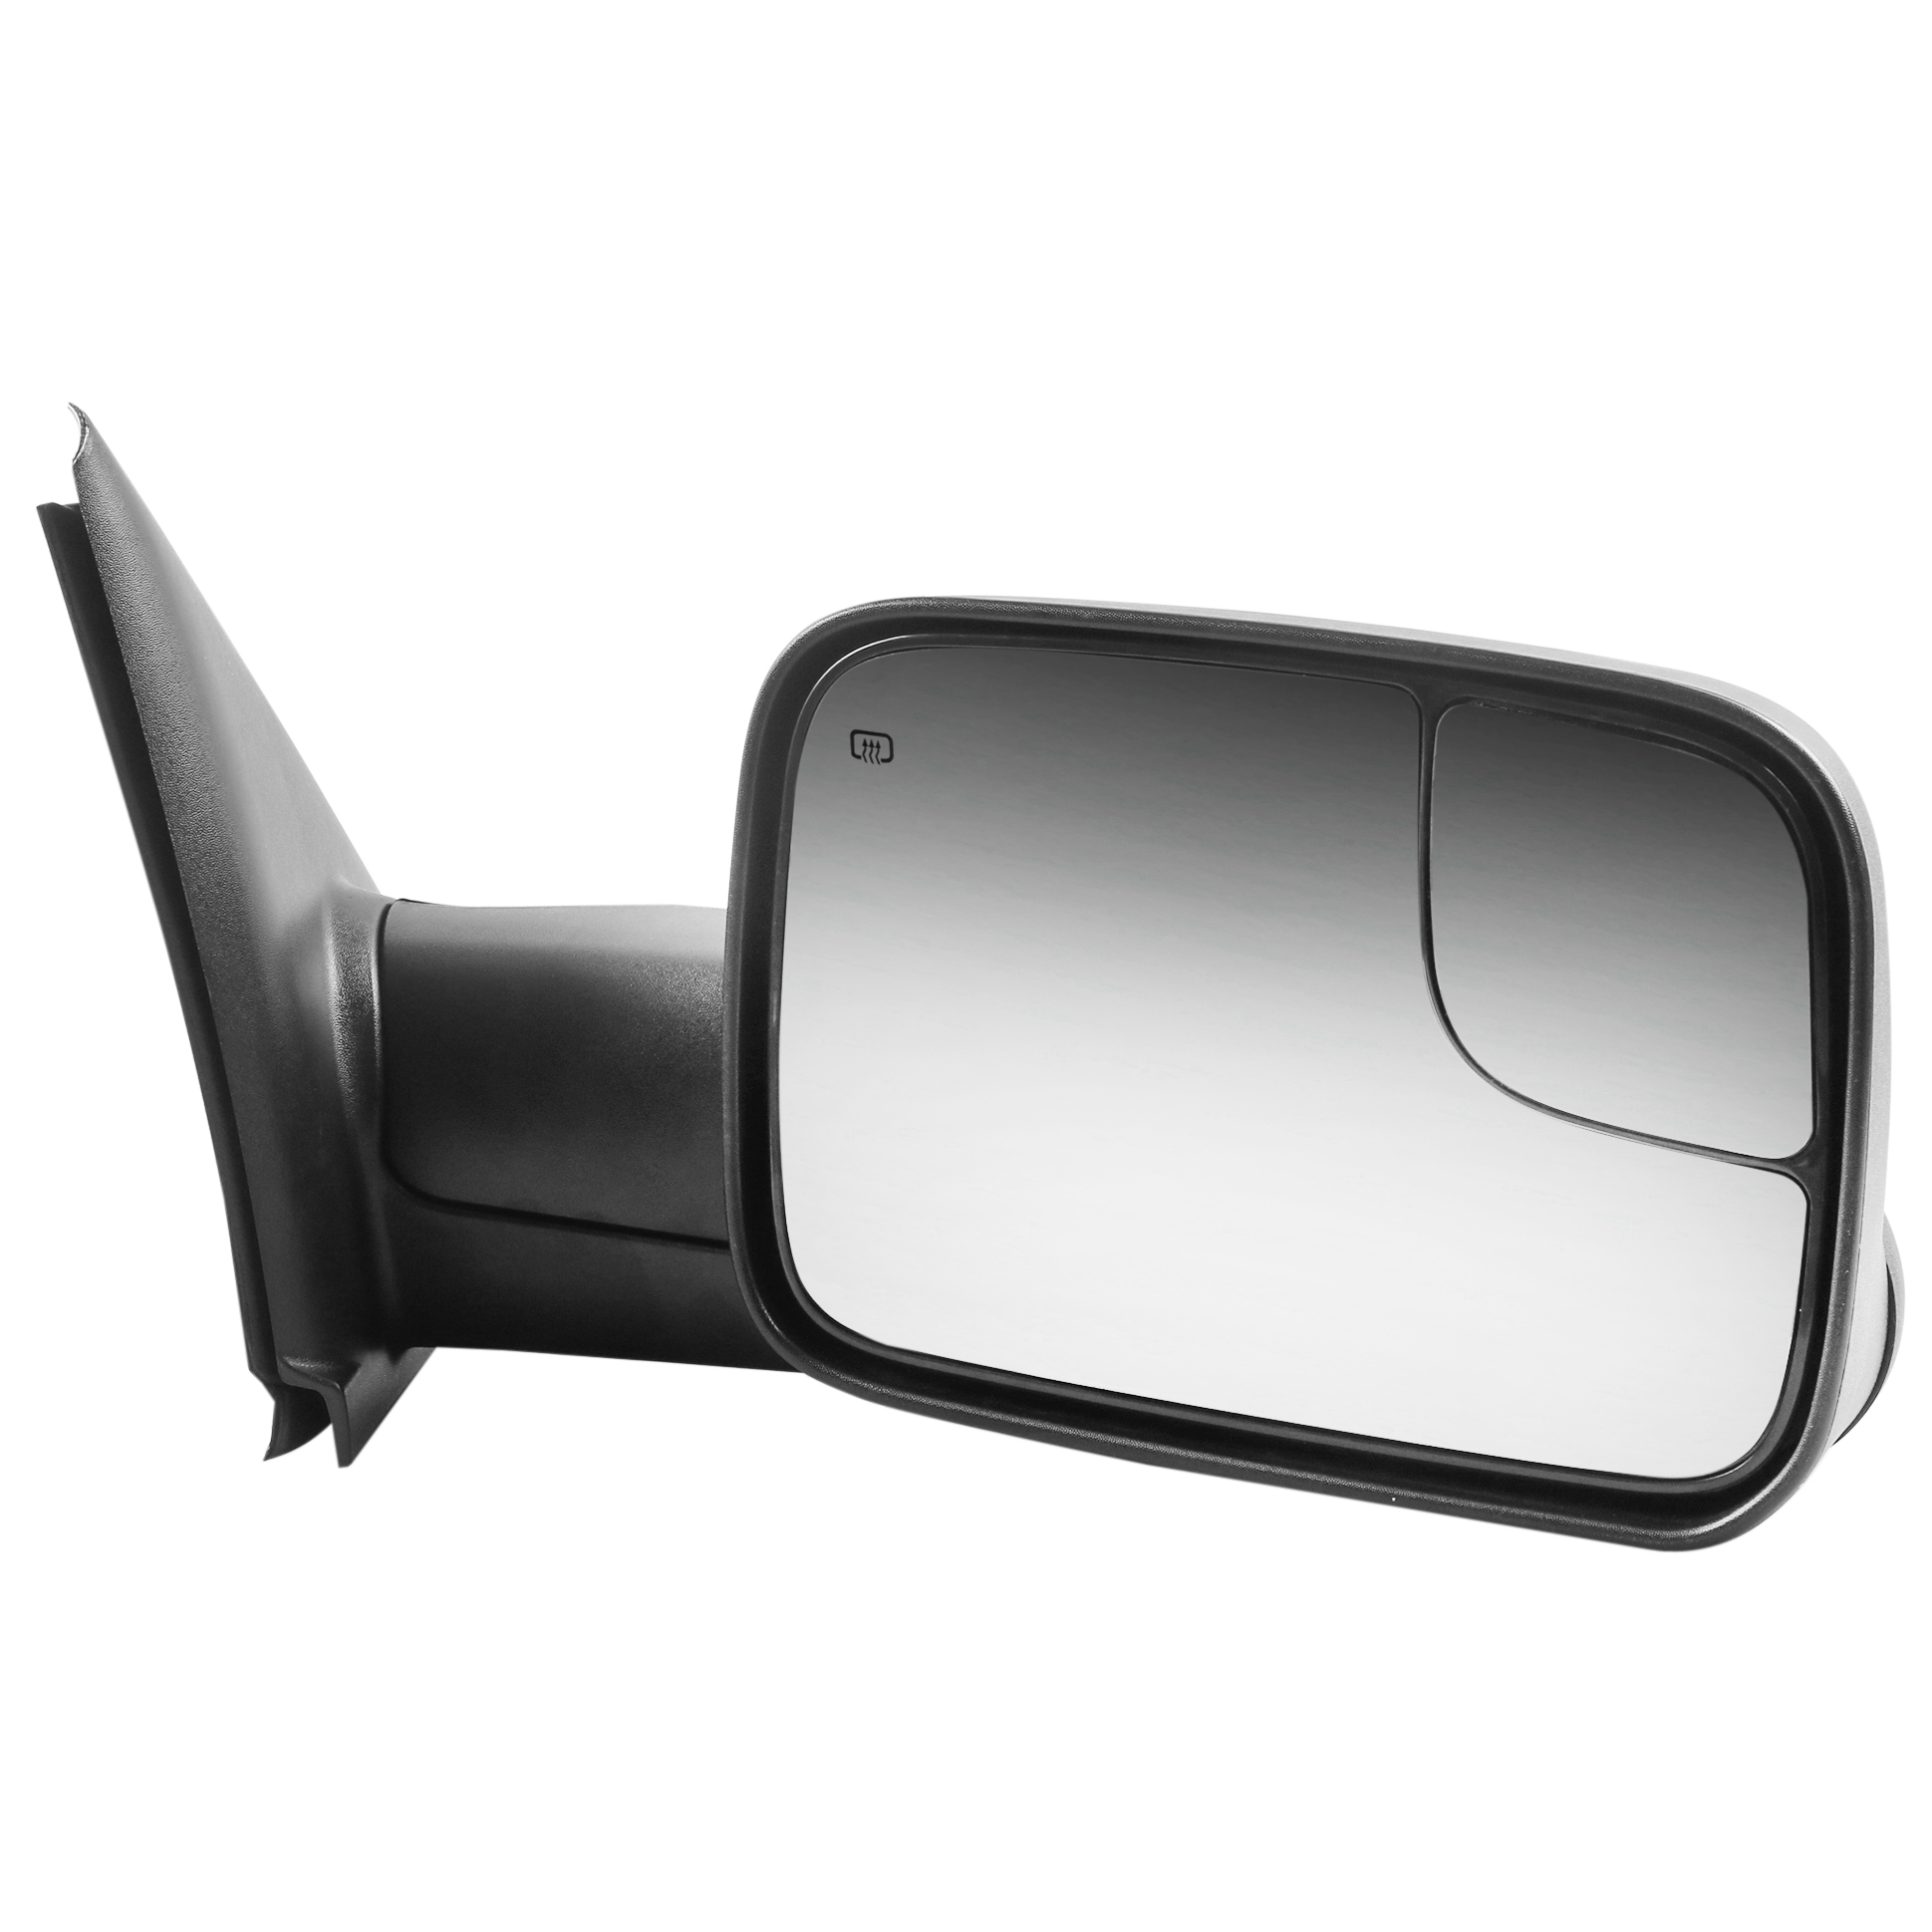 Passenger Side Power Heated Tow Mirror for 03-08 Dodge Ram 1500-3500 Dual Glass | eBay 2008 Dodge Ram 1500 Passenger Side Mirror